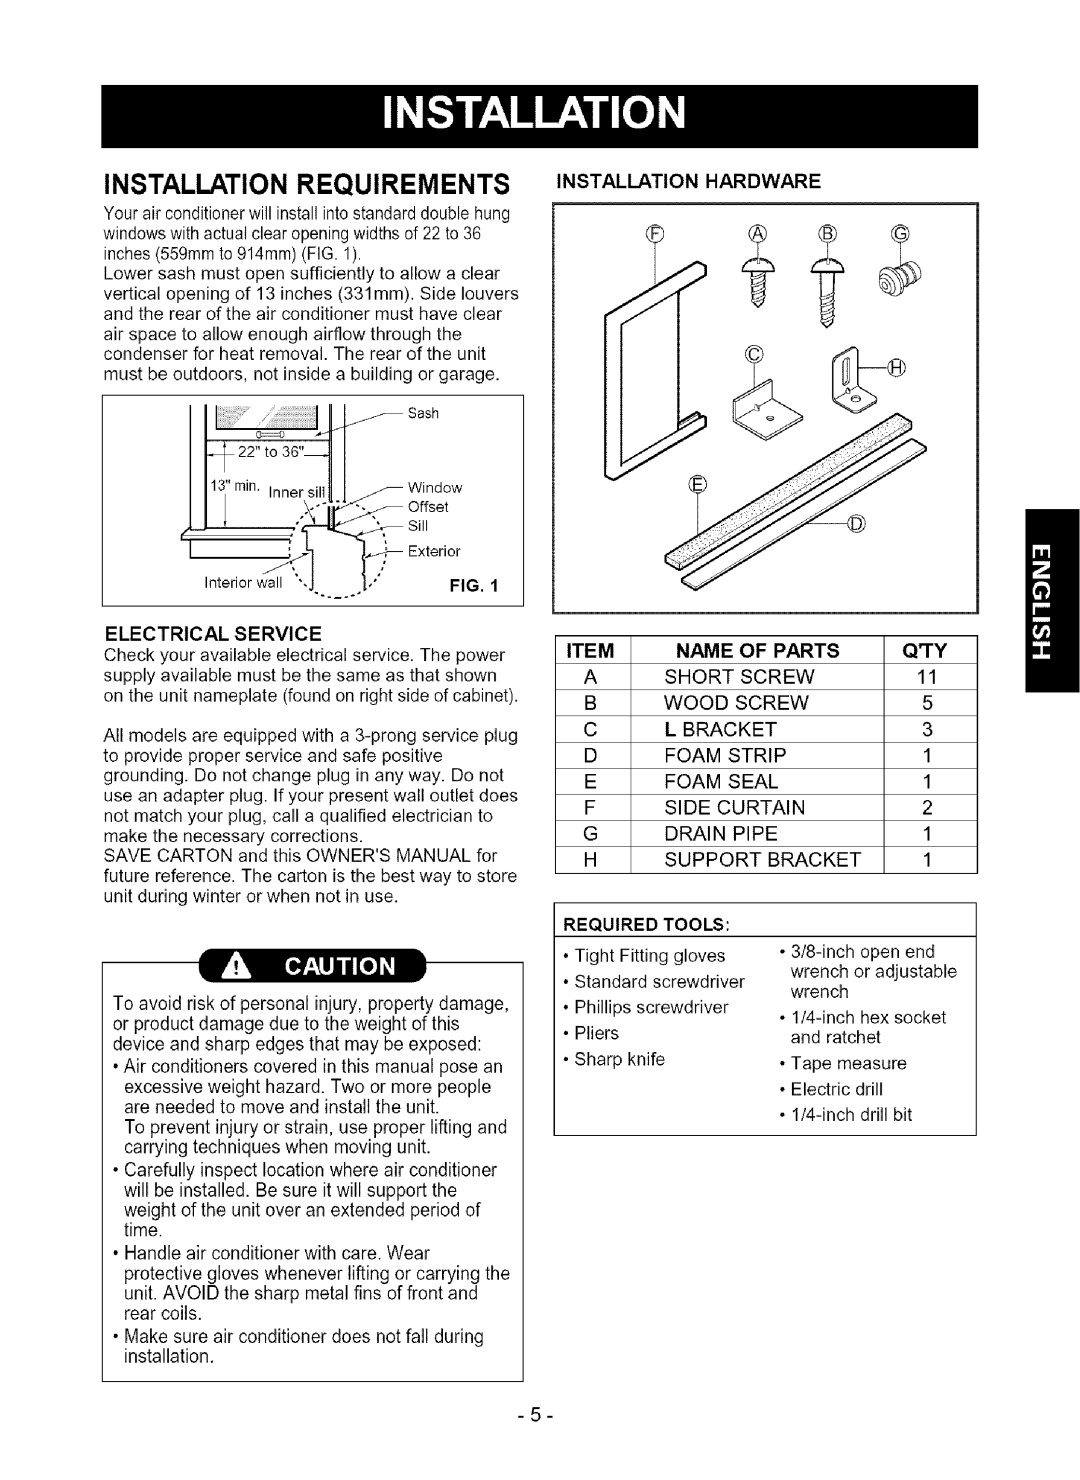 Kenmore 580.75080 owner manual Installation Requirements Installation Hardware, 22to36qI, 1113mninnersilll, Window 